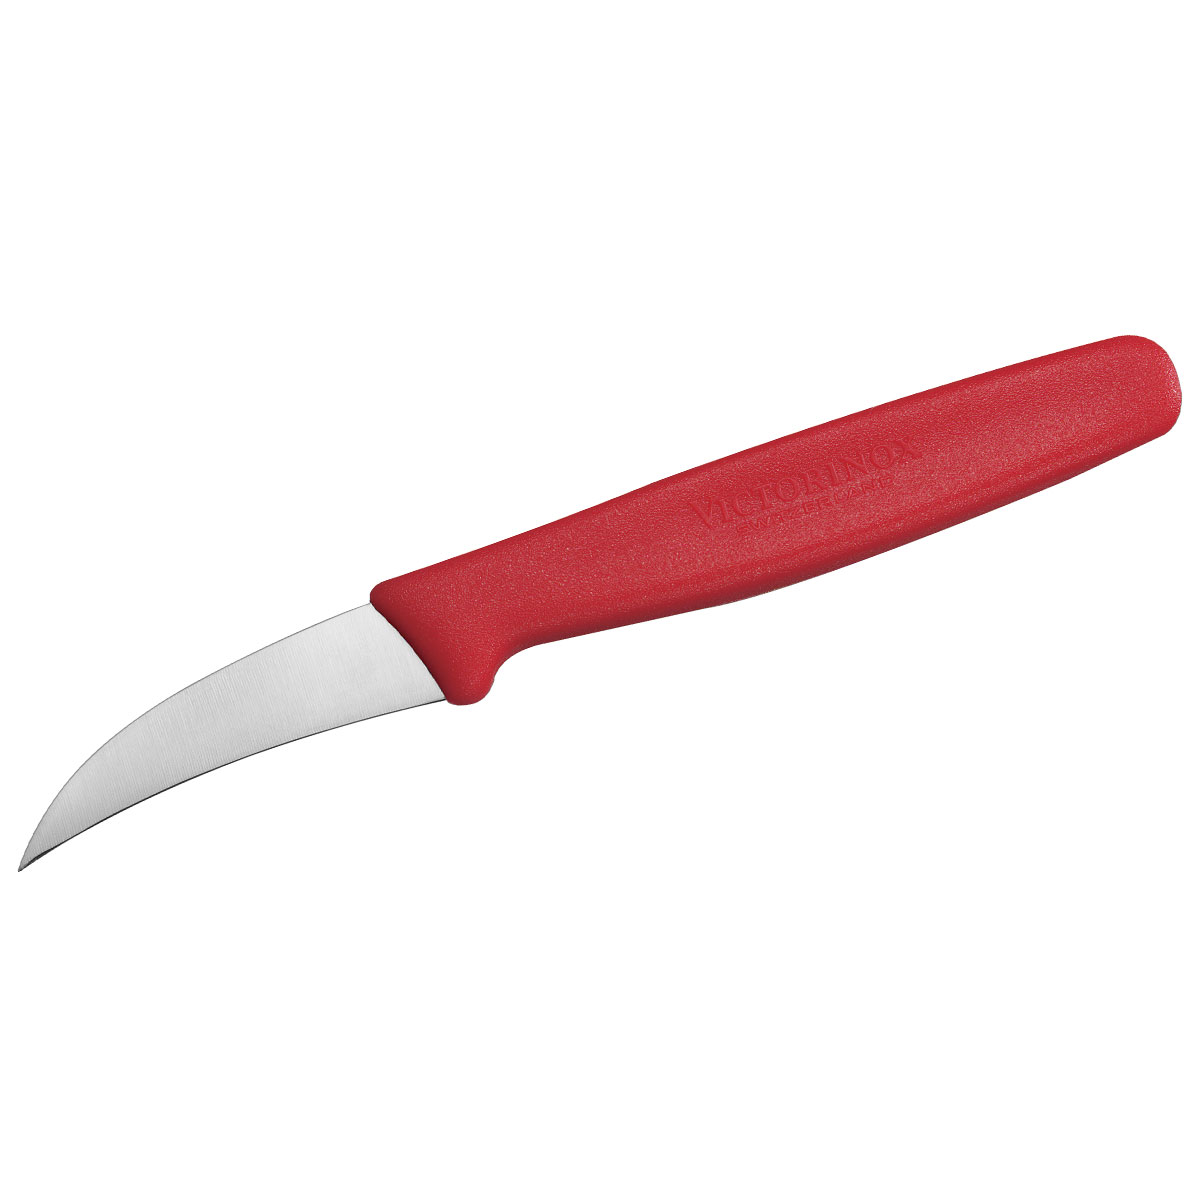 Victorinox Shaping Knife, 6cm (2 1/4) - Curved, Plain Edge - Red